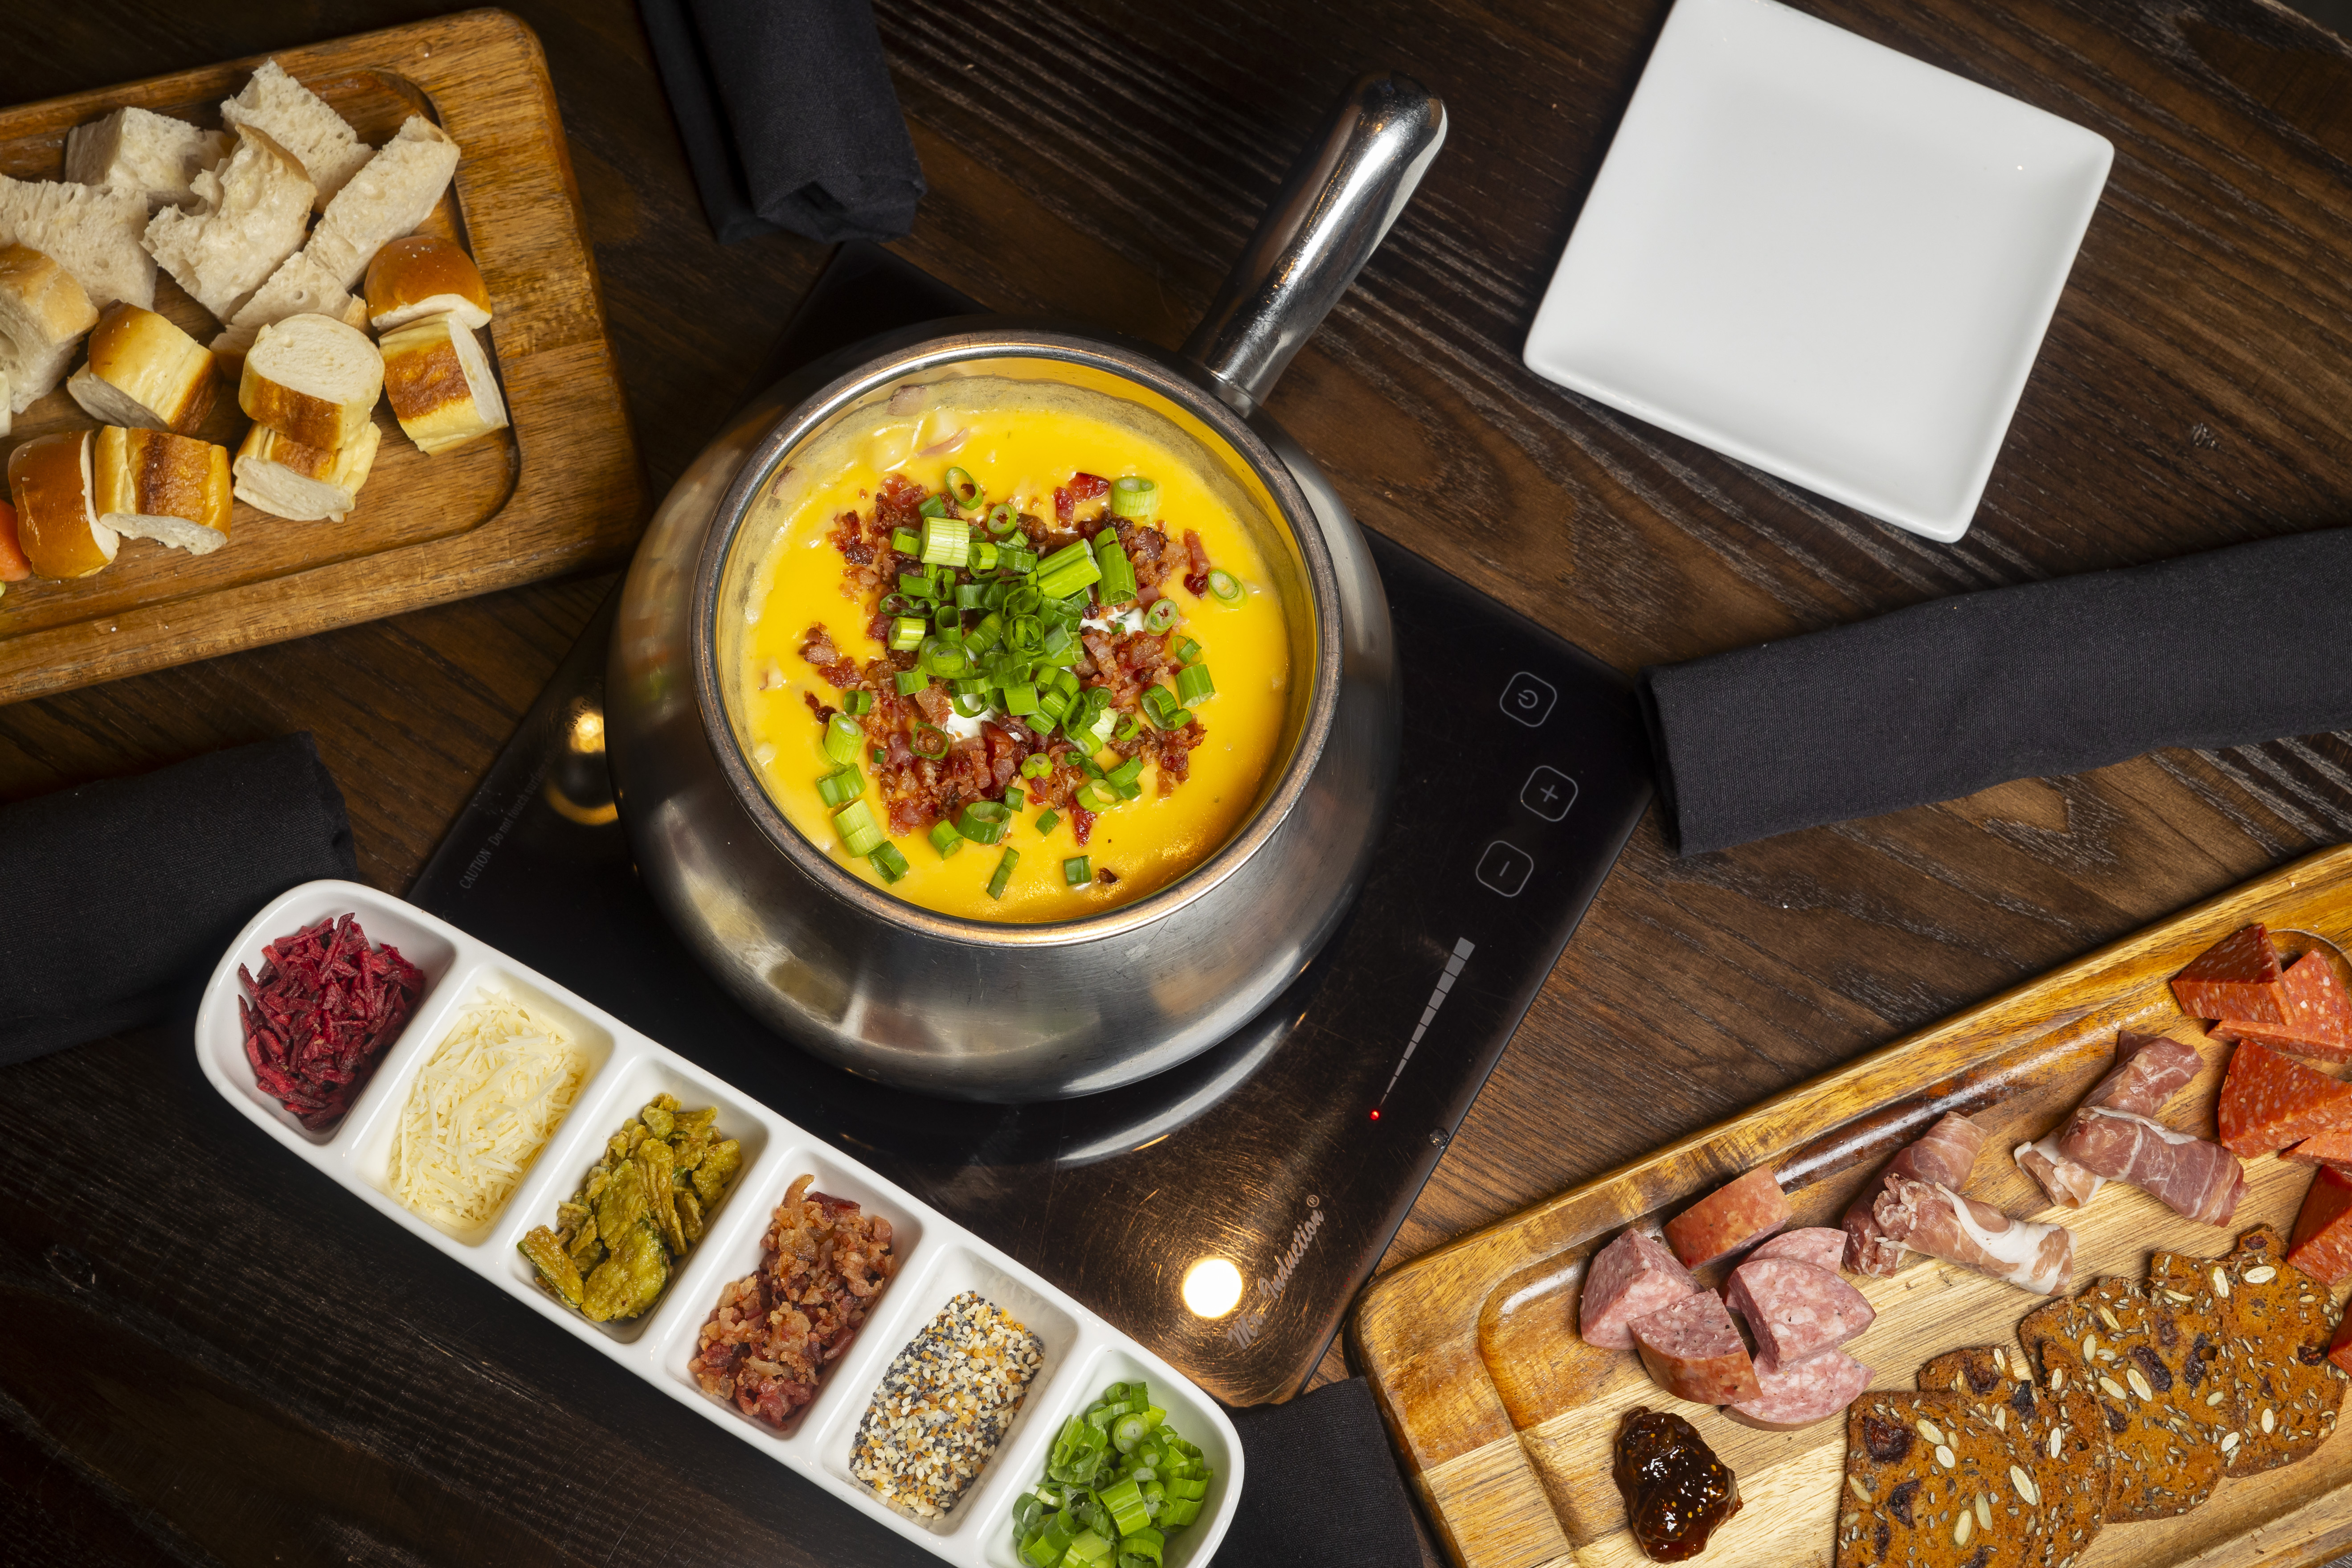 A fondue pot filled with cheese atop a table, alongside a dish of fondue toppings and cutting boards ladenwith bread and chunks of meat.